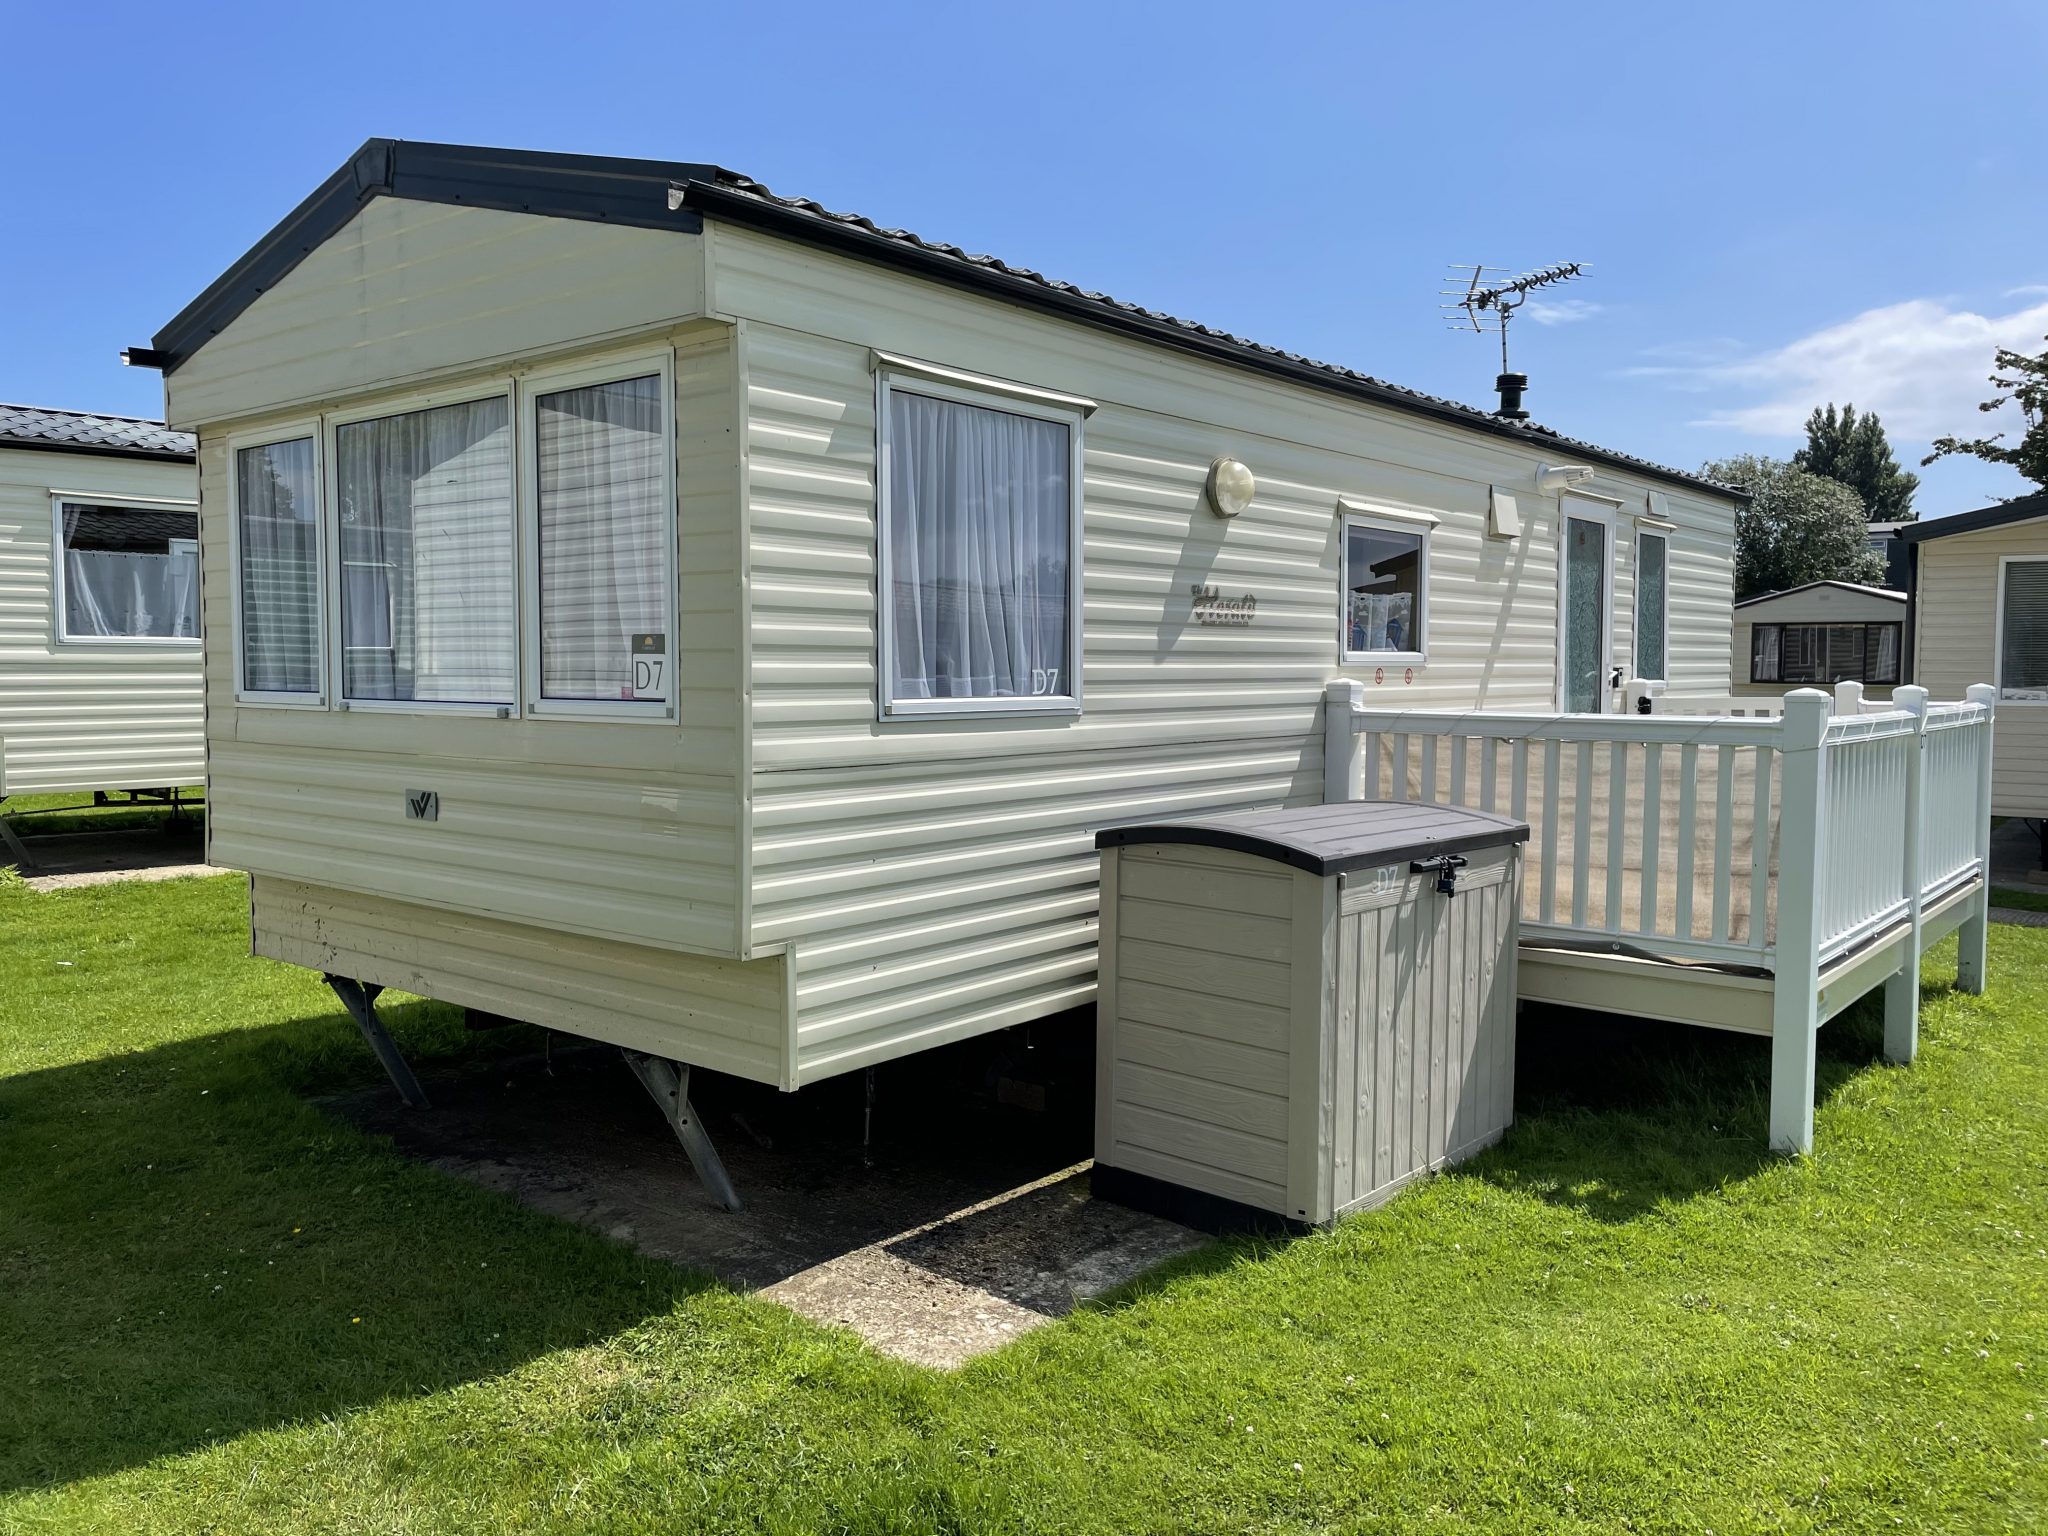 Willerby holiday homes hull jobs